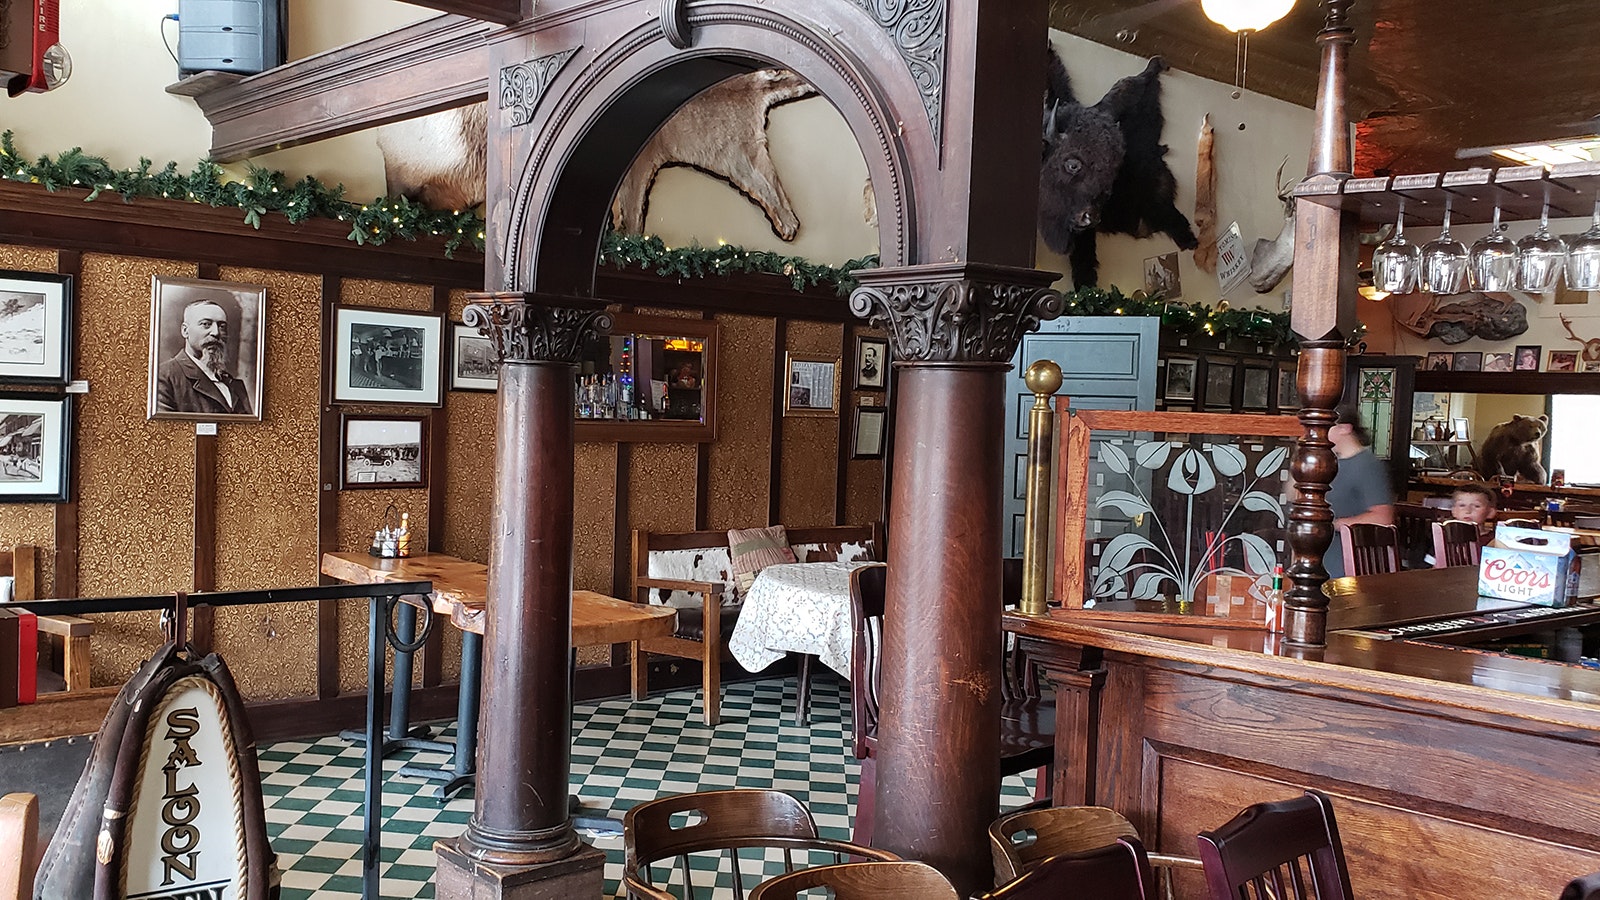 The saloon has most of its original woodwork intact.